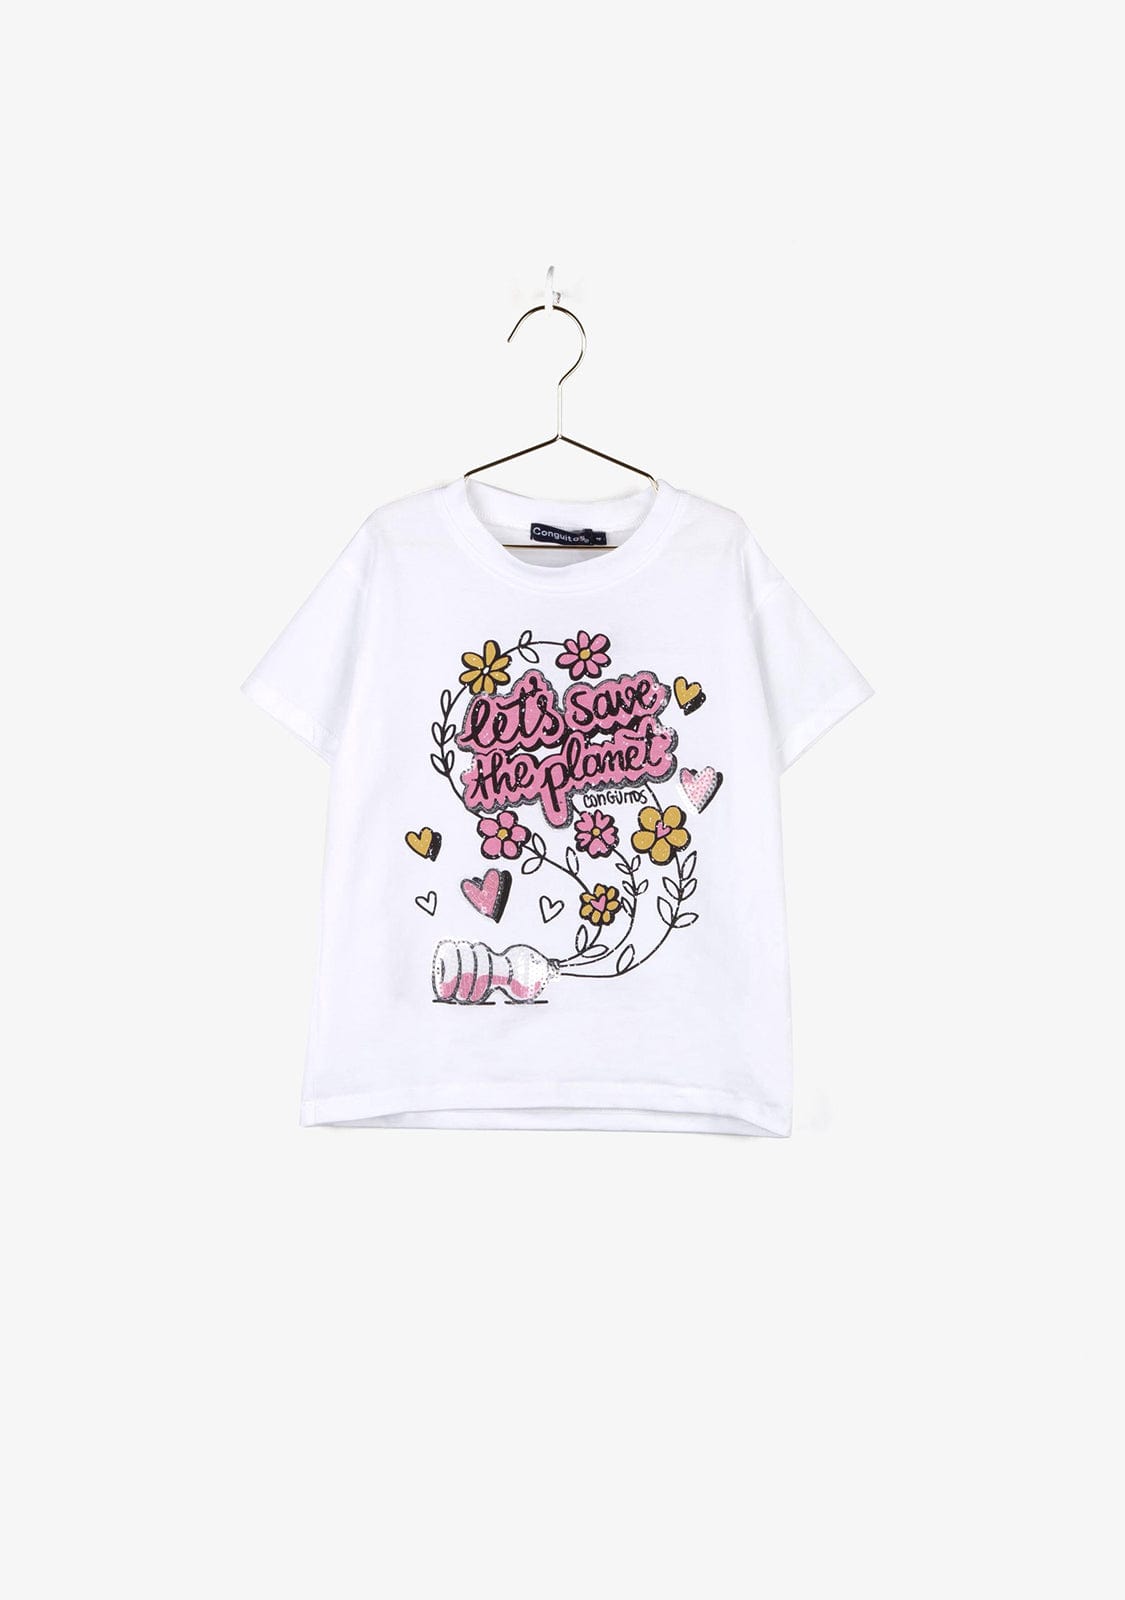 CONGUITOS TEXTIL Clothing Girl's "Save the Planet" T-Shirt